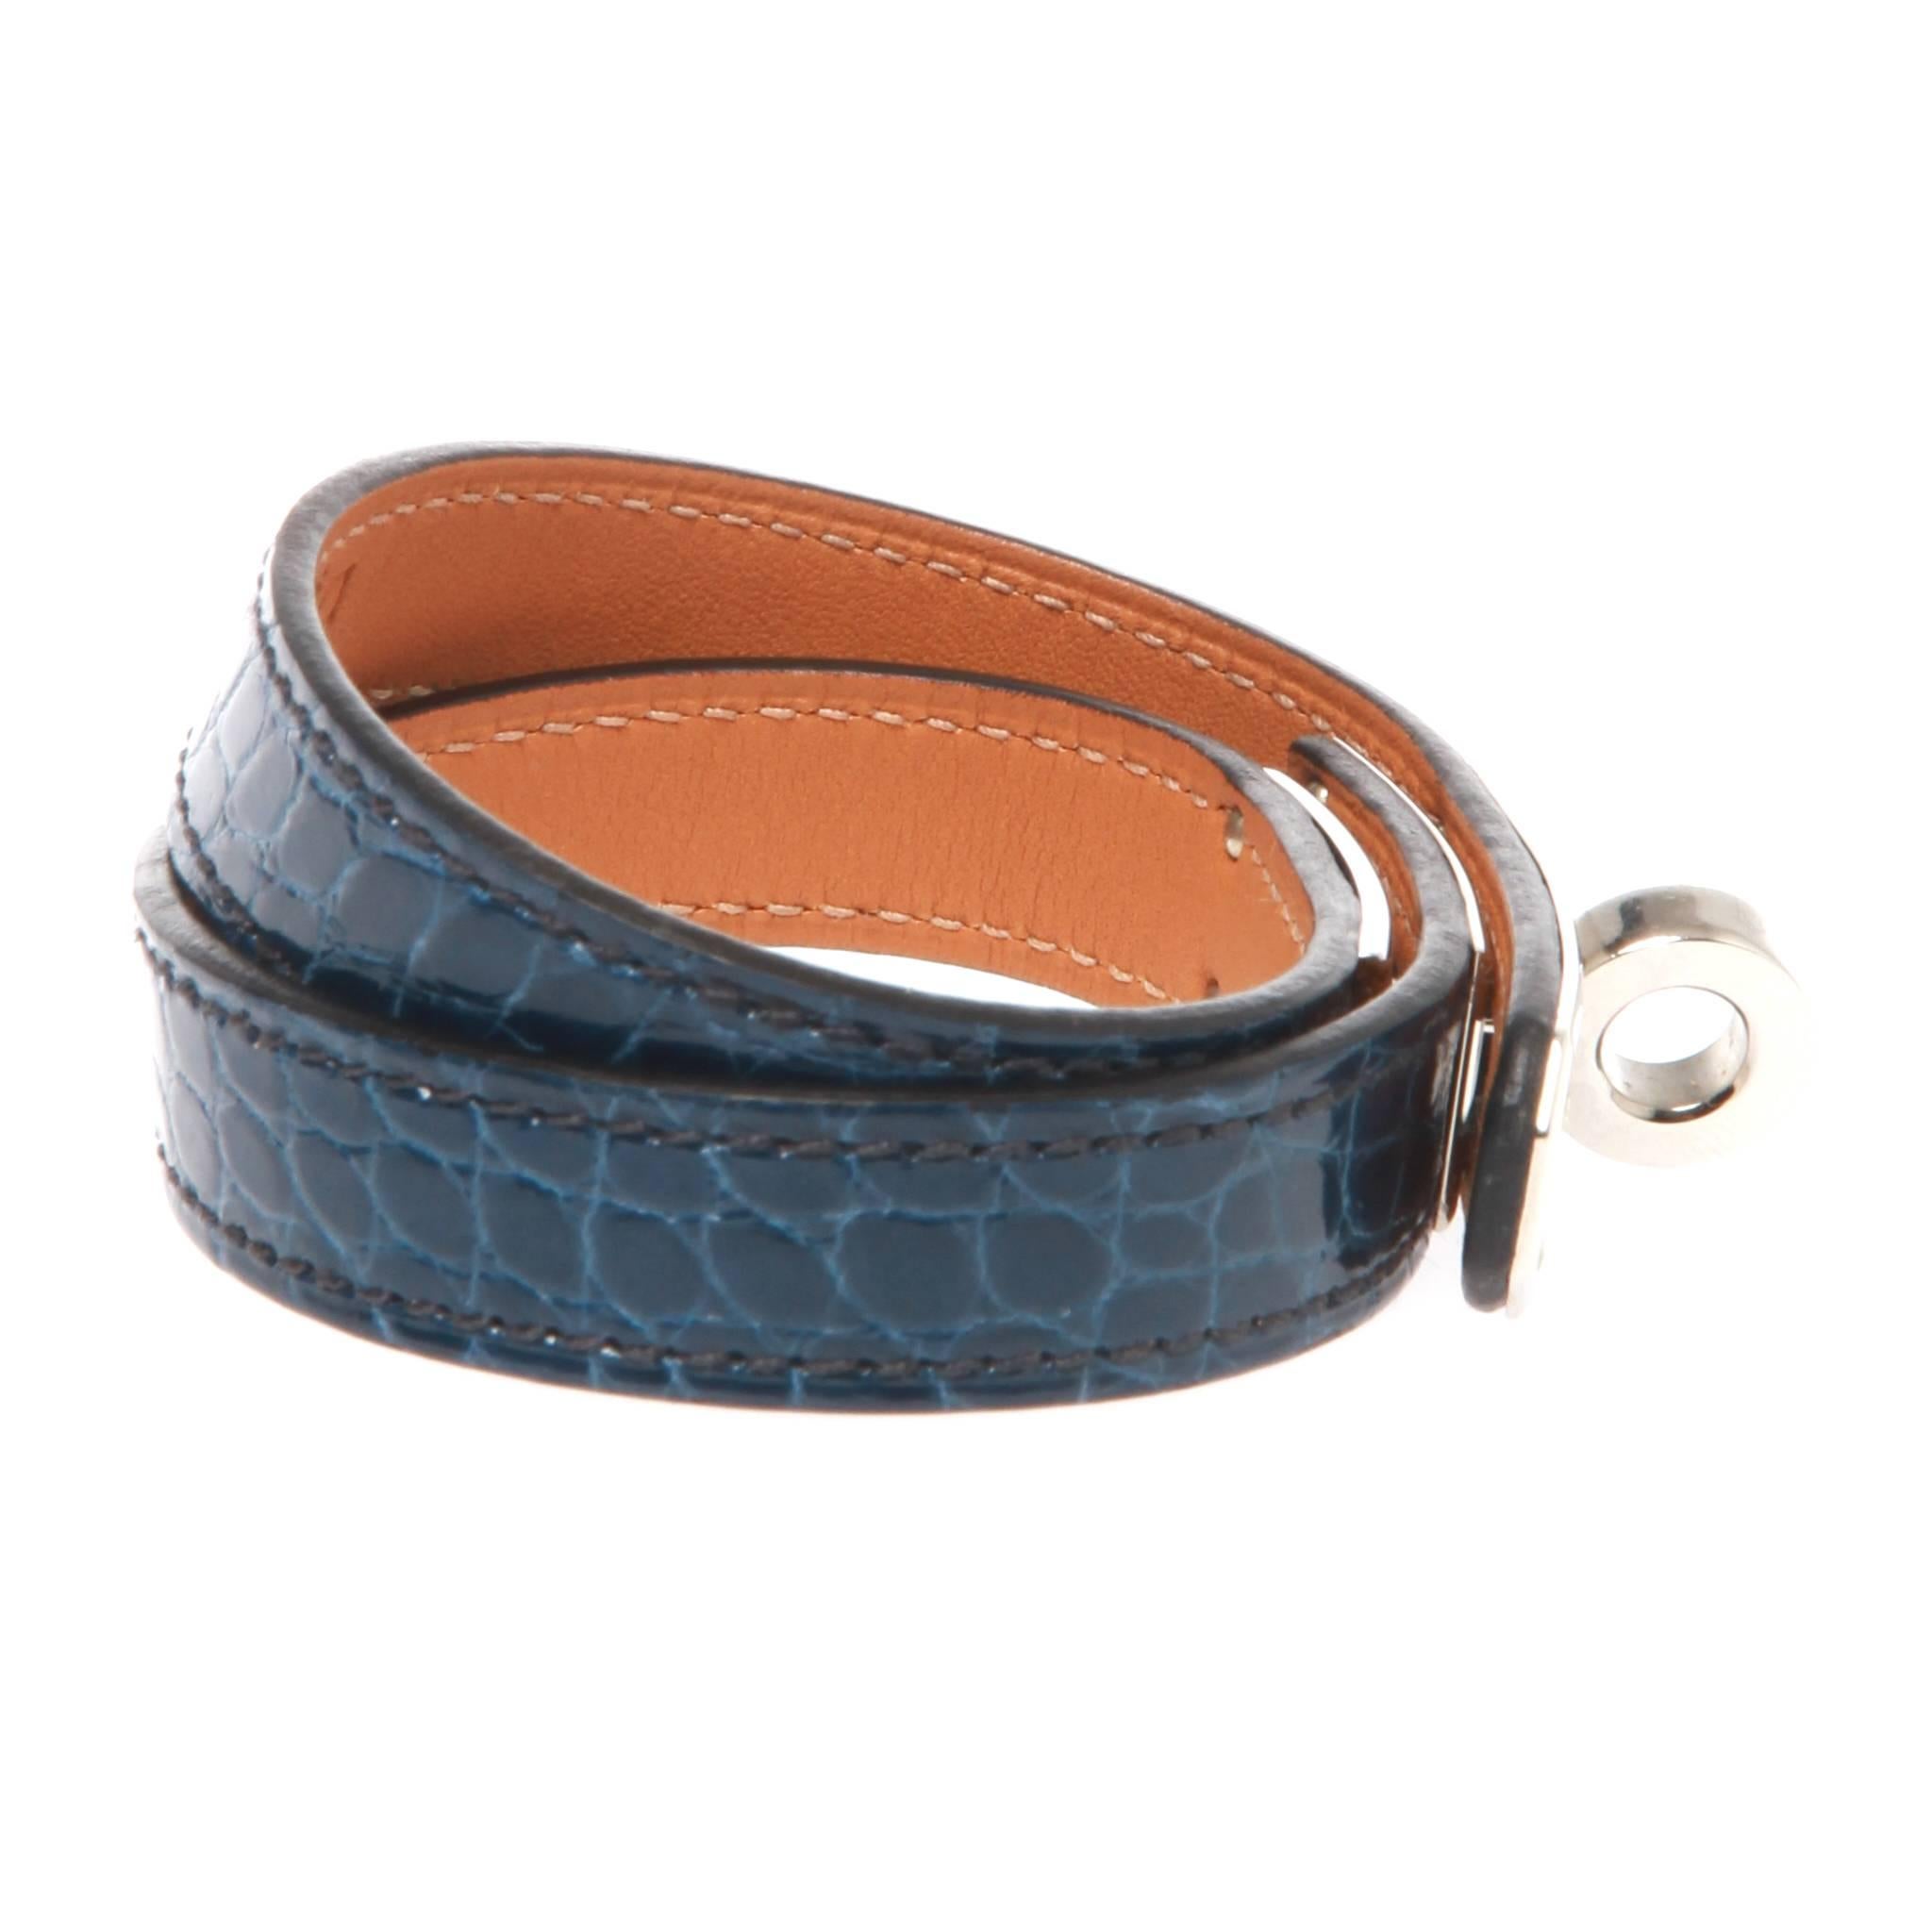 Blue agate alligator Hermès Kelly double tour bracelet featuring palladium-plated hardware and turn lock closure. Blind stamped Square P from 2012. 